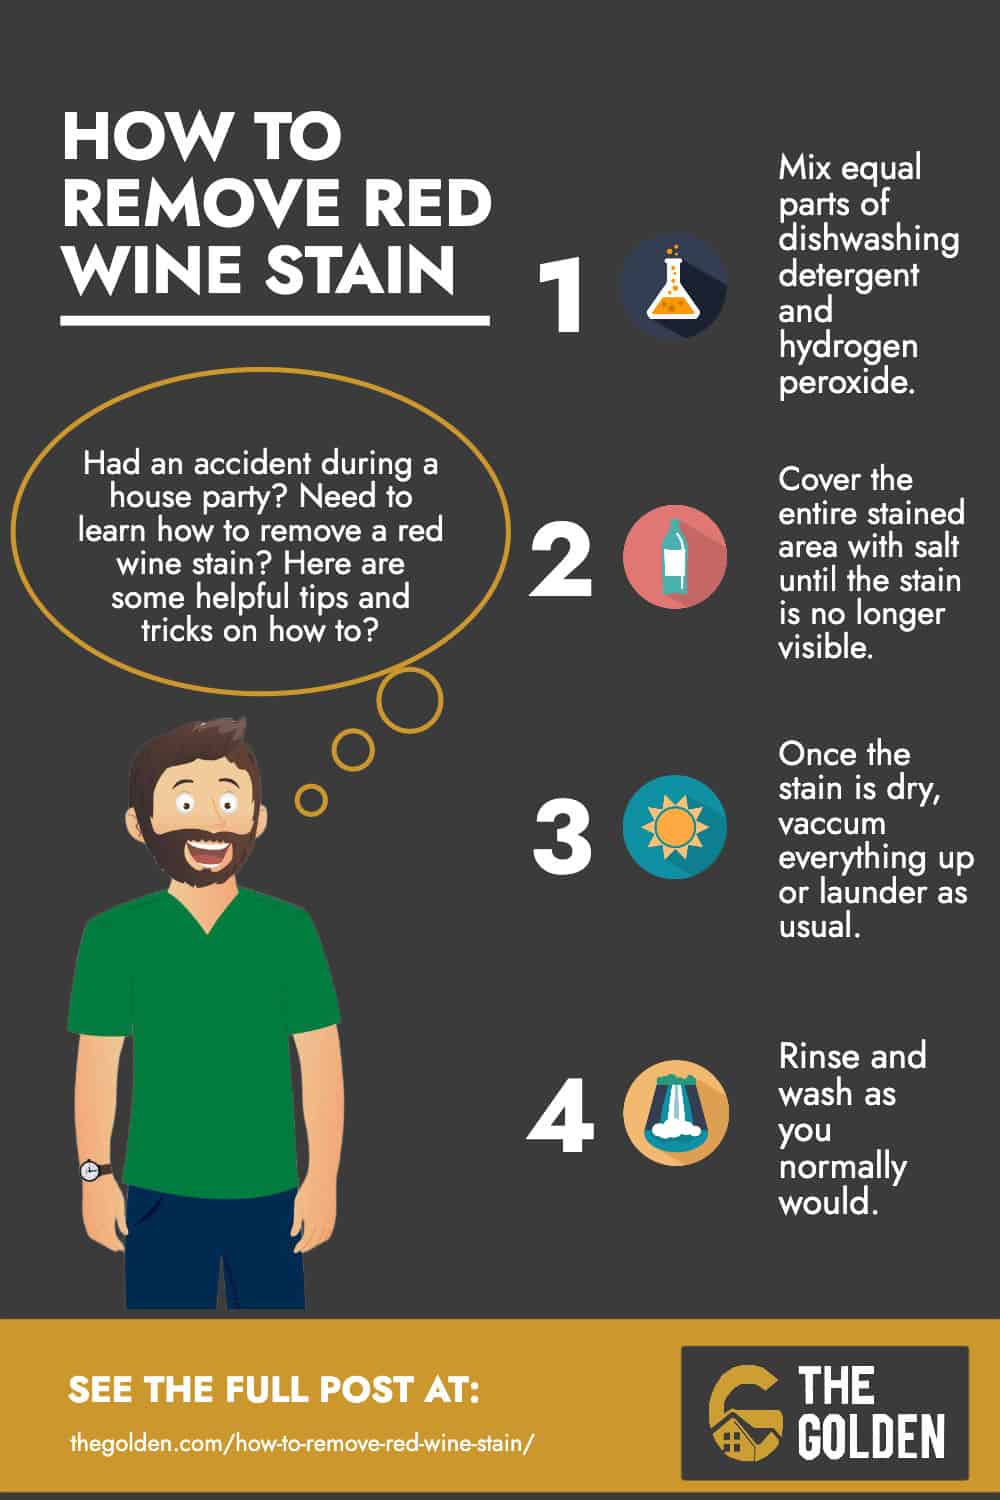 How To Remove Red Wine Stain - Infographic